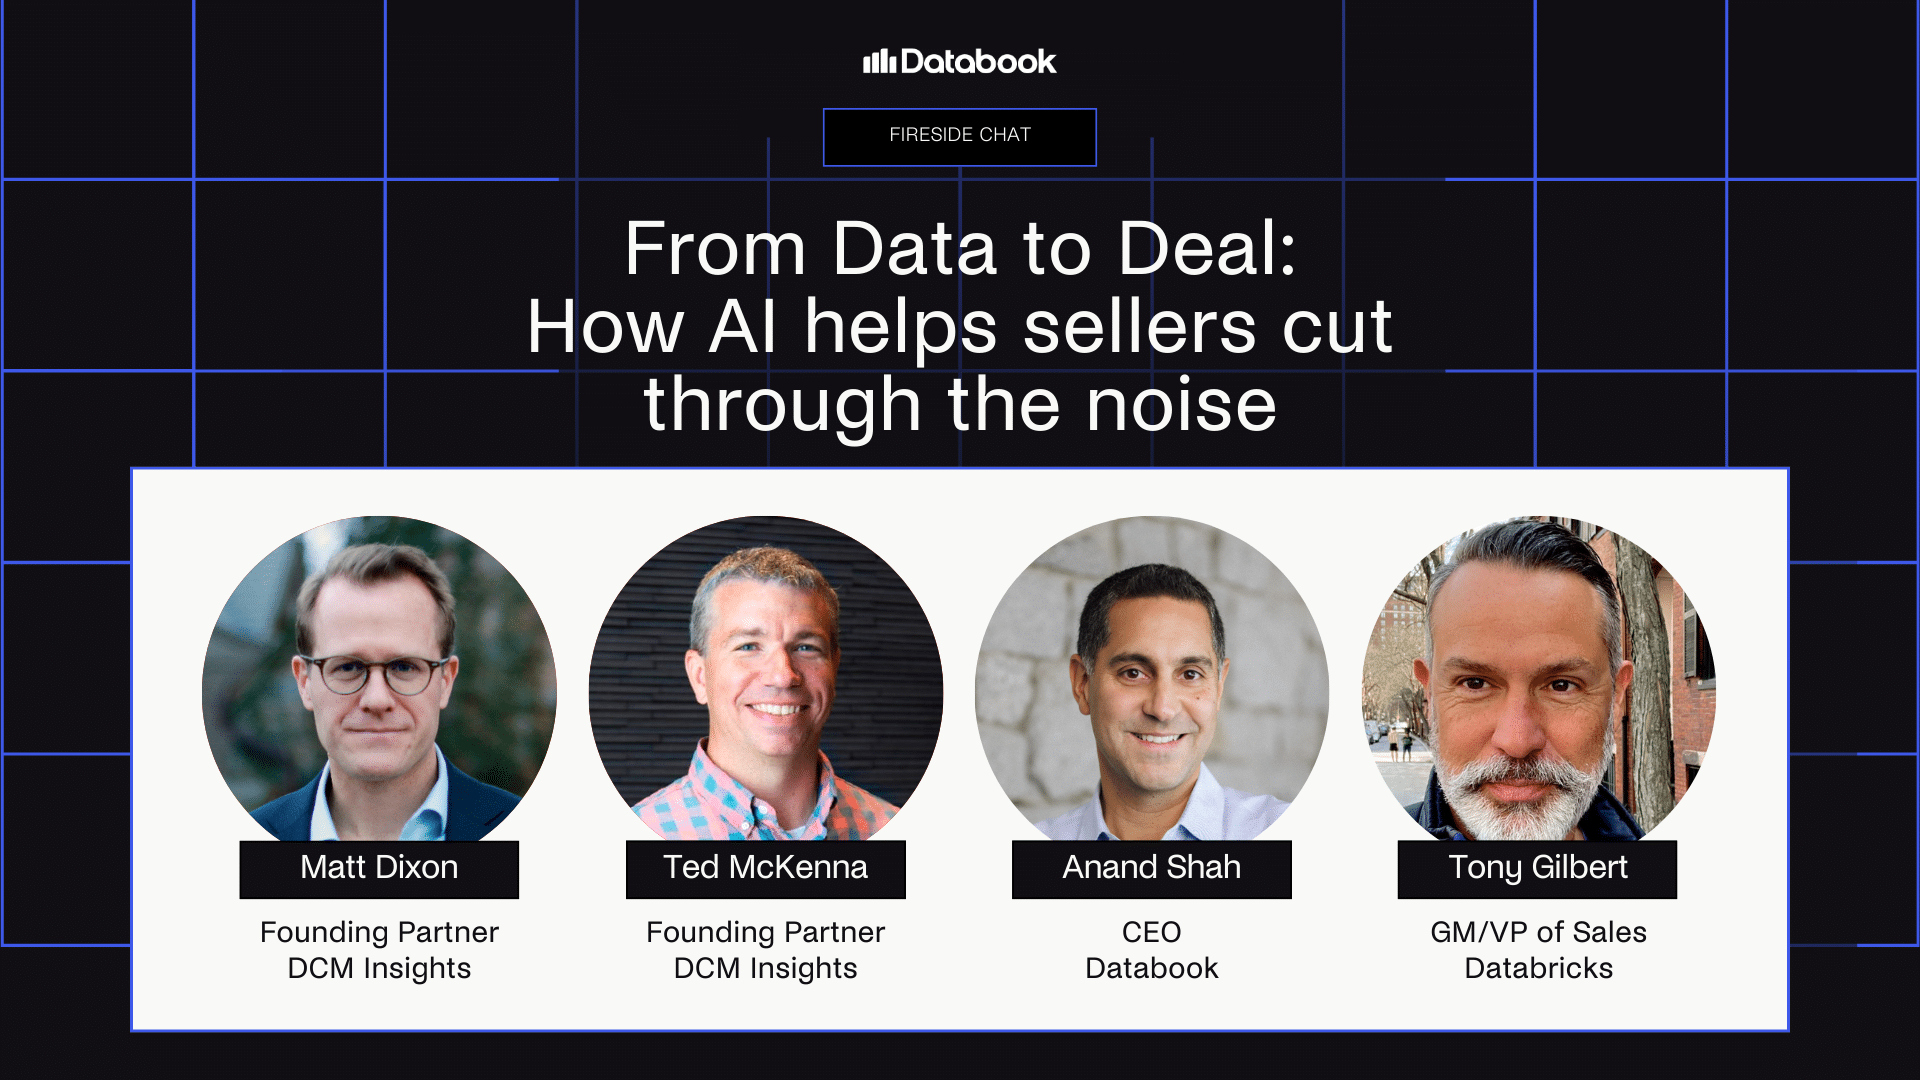 From Data to Deal: How AI Helps Sellers Cut through the Noise